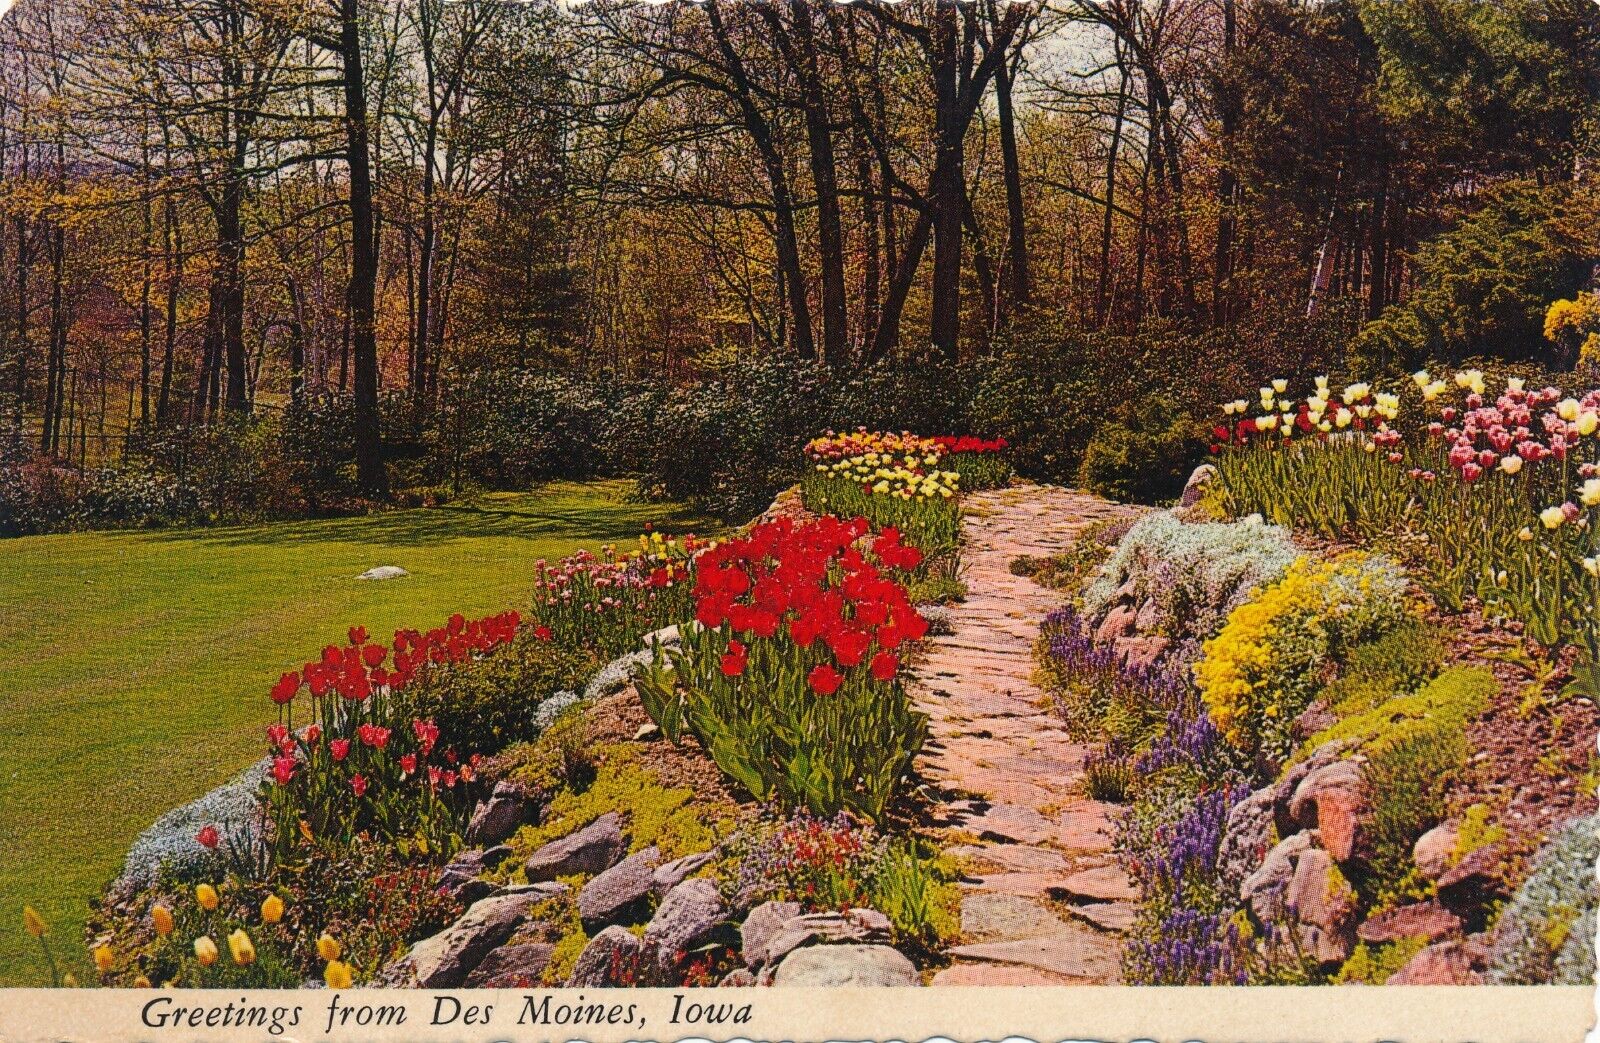 Greetings from Des Moines, Iowa tulip garden vintage continental unposted